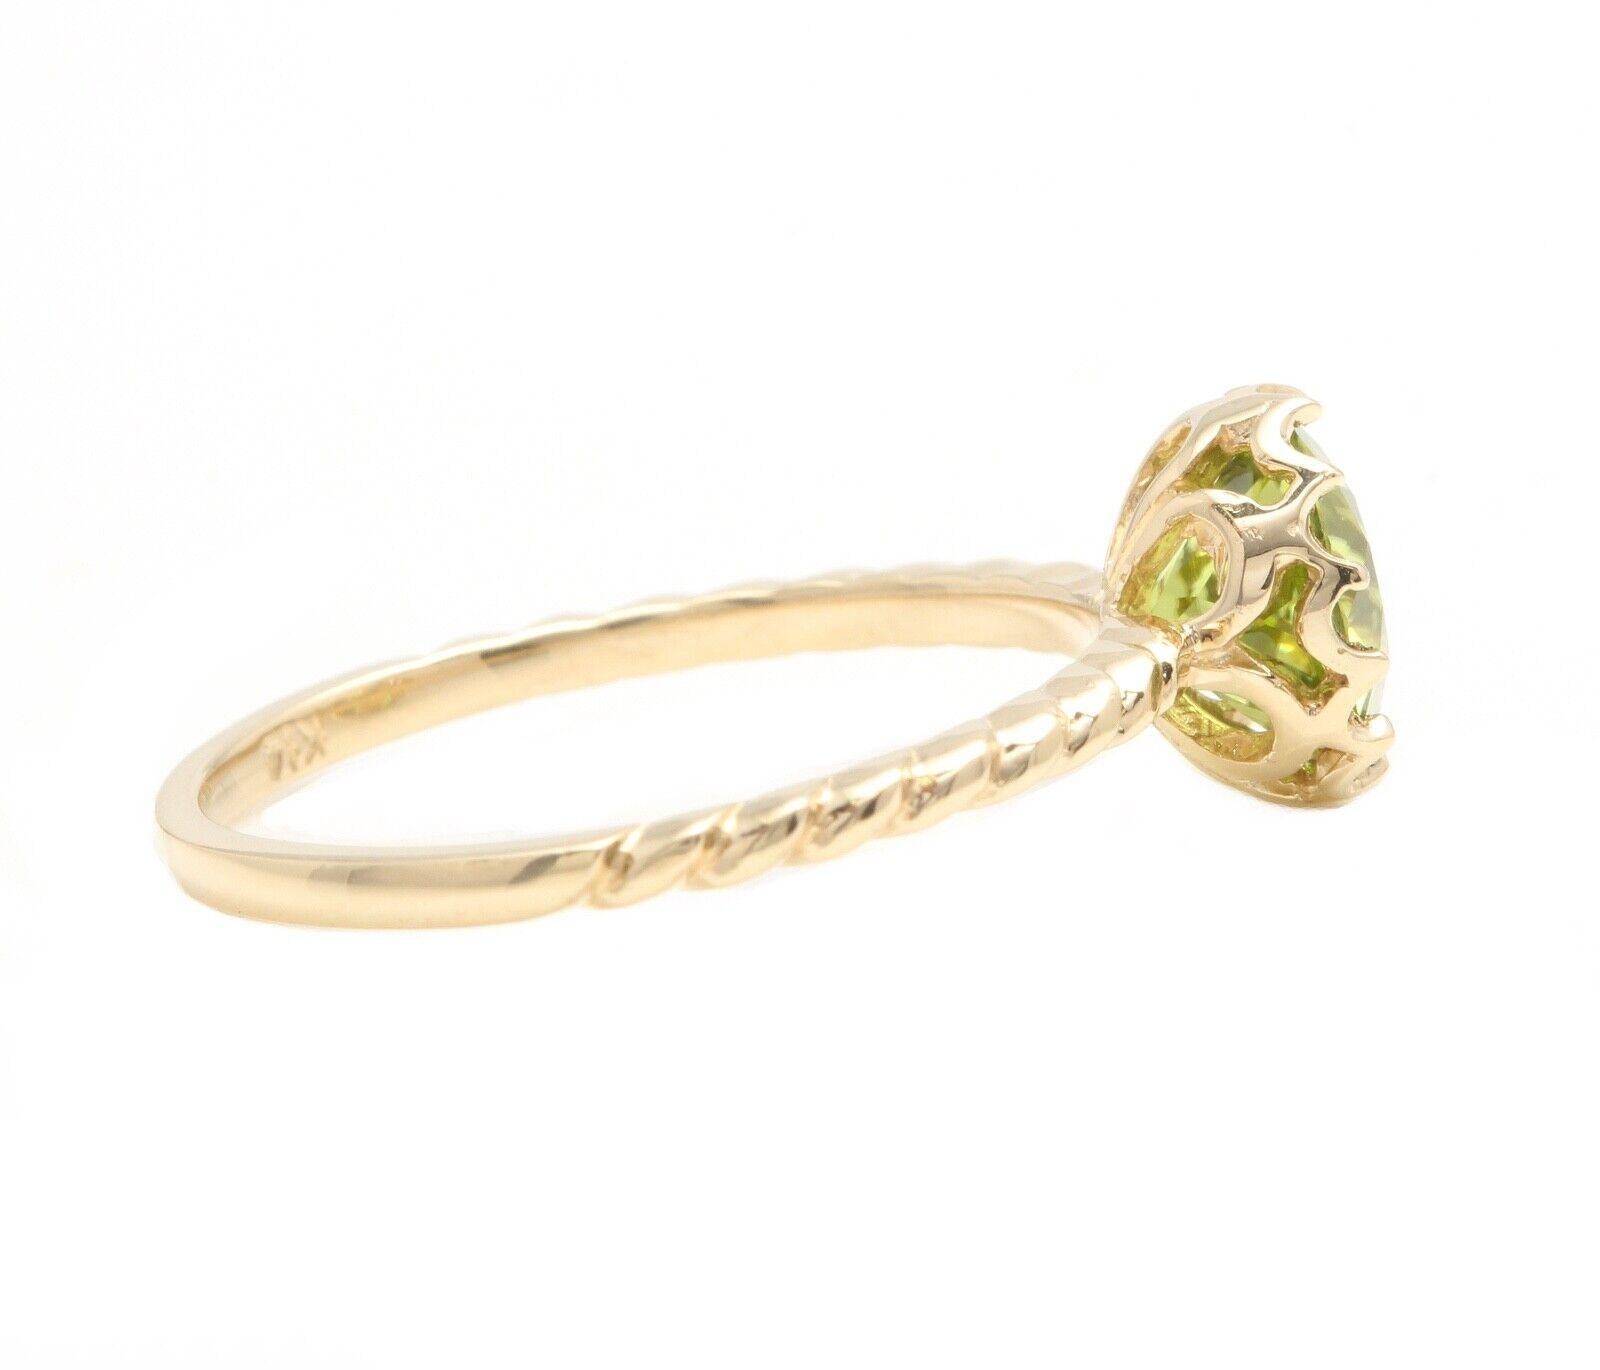 1.50 Carats Exquisite Natural Peridot 14K Solid Yellow Gold Ring

Total Natural Peridot Weight is: Approx. 1.50 Carats 

Peridot Measures: Approx. 7.00 mm

Ring size: 7 (we offer free re-sizing upon request)

Ring total weight: Approx. 2.0